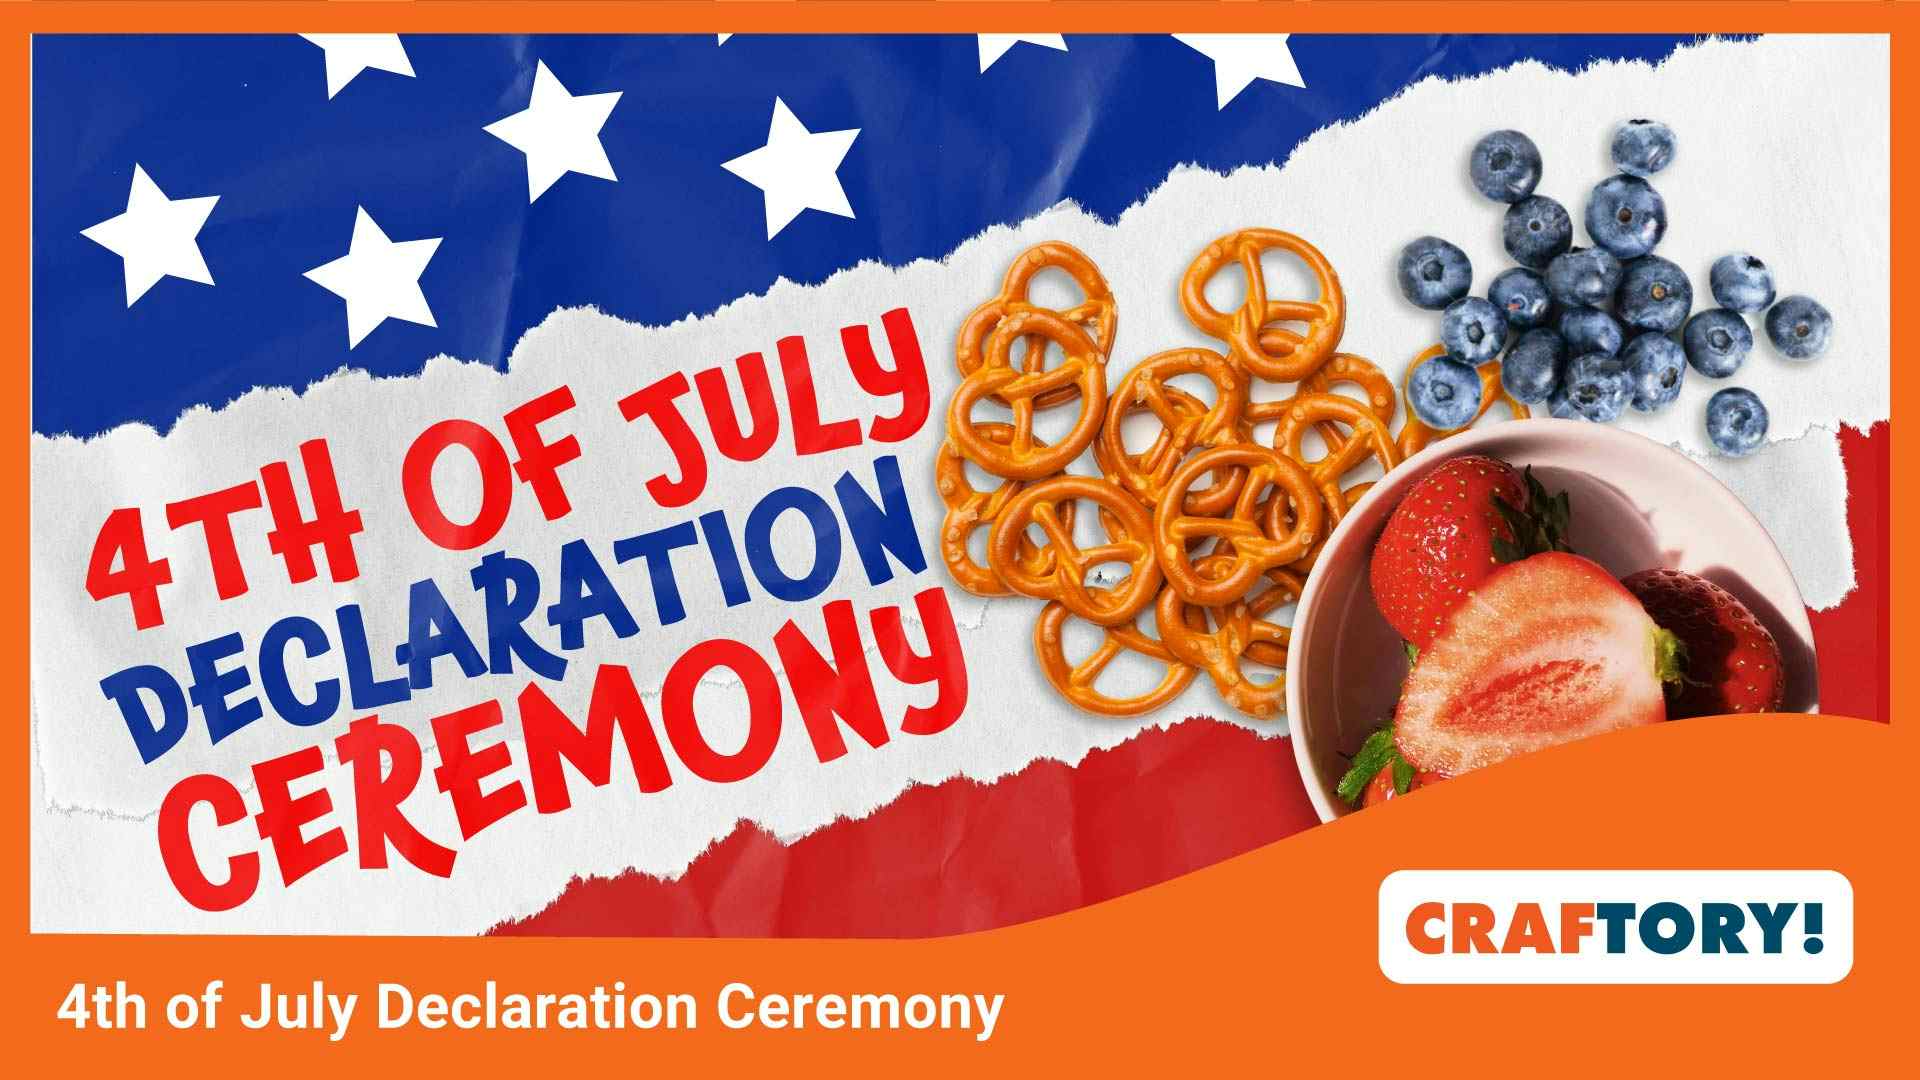 A 4th of July Declaration Ceremony